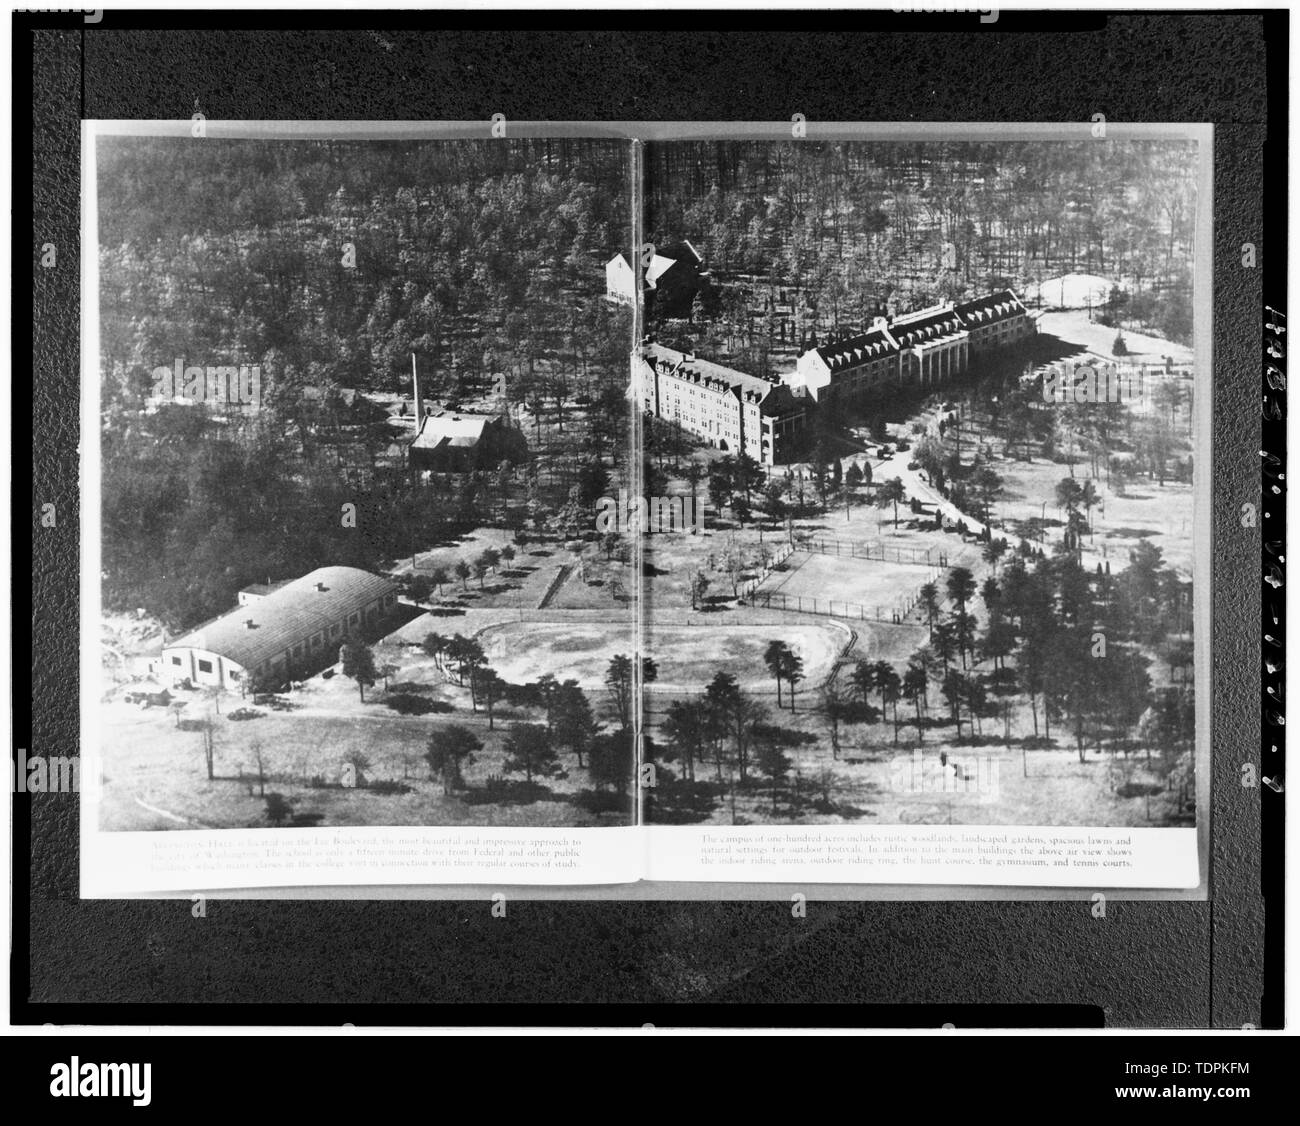 ca. 1928 (original print on file at U.S. Army Intelligence Security Command, Fort Belvoir, Virginia). AERIAL VIEW OF ARLINGTON HALL JUNIOR COLLEGE. VIEW TO SOUTHWEST. - Arlington Hall Station, 4000 Arlington Boulevard, Arlington, Arlington County, VA; VanDyke, Tina, transmitter Stock Photo